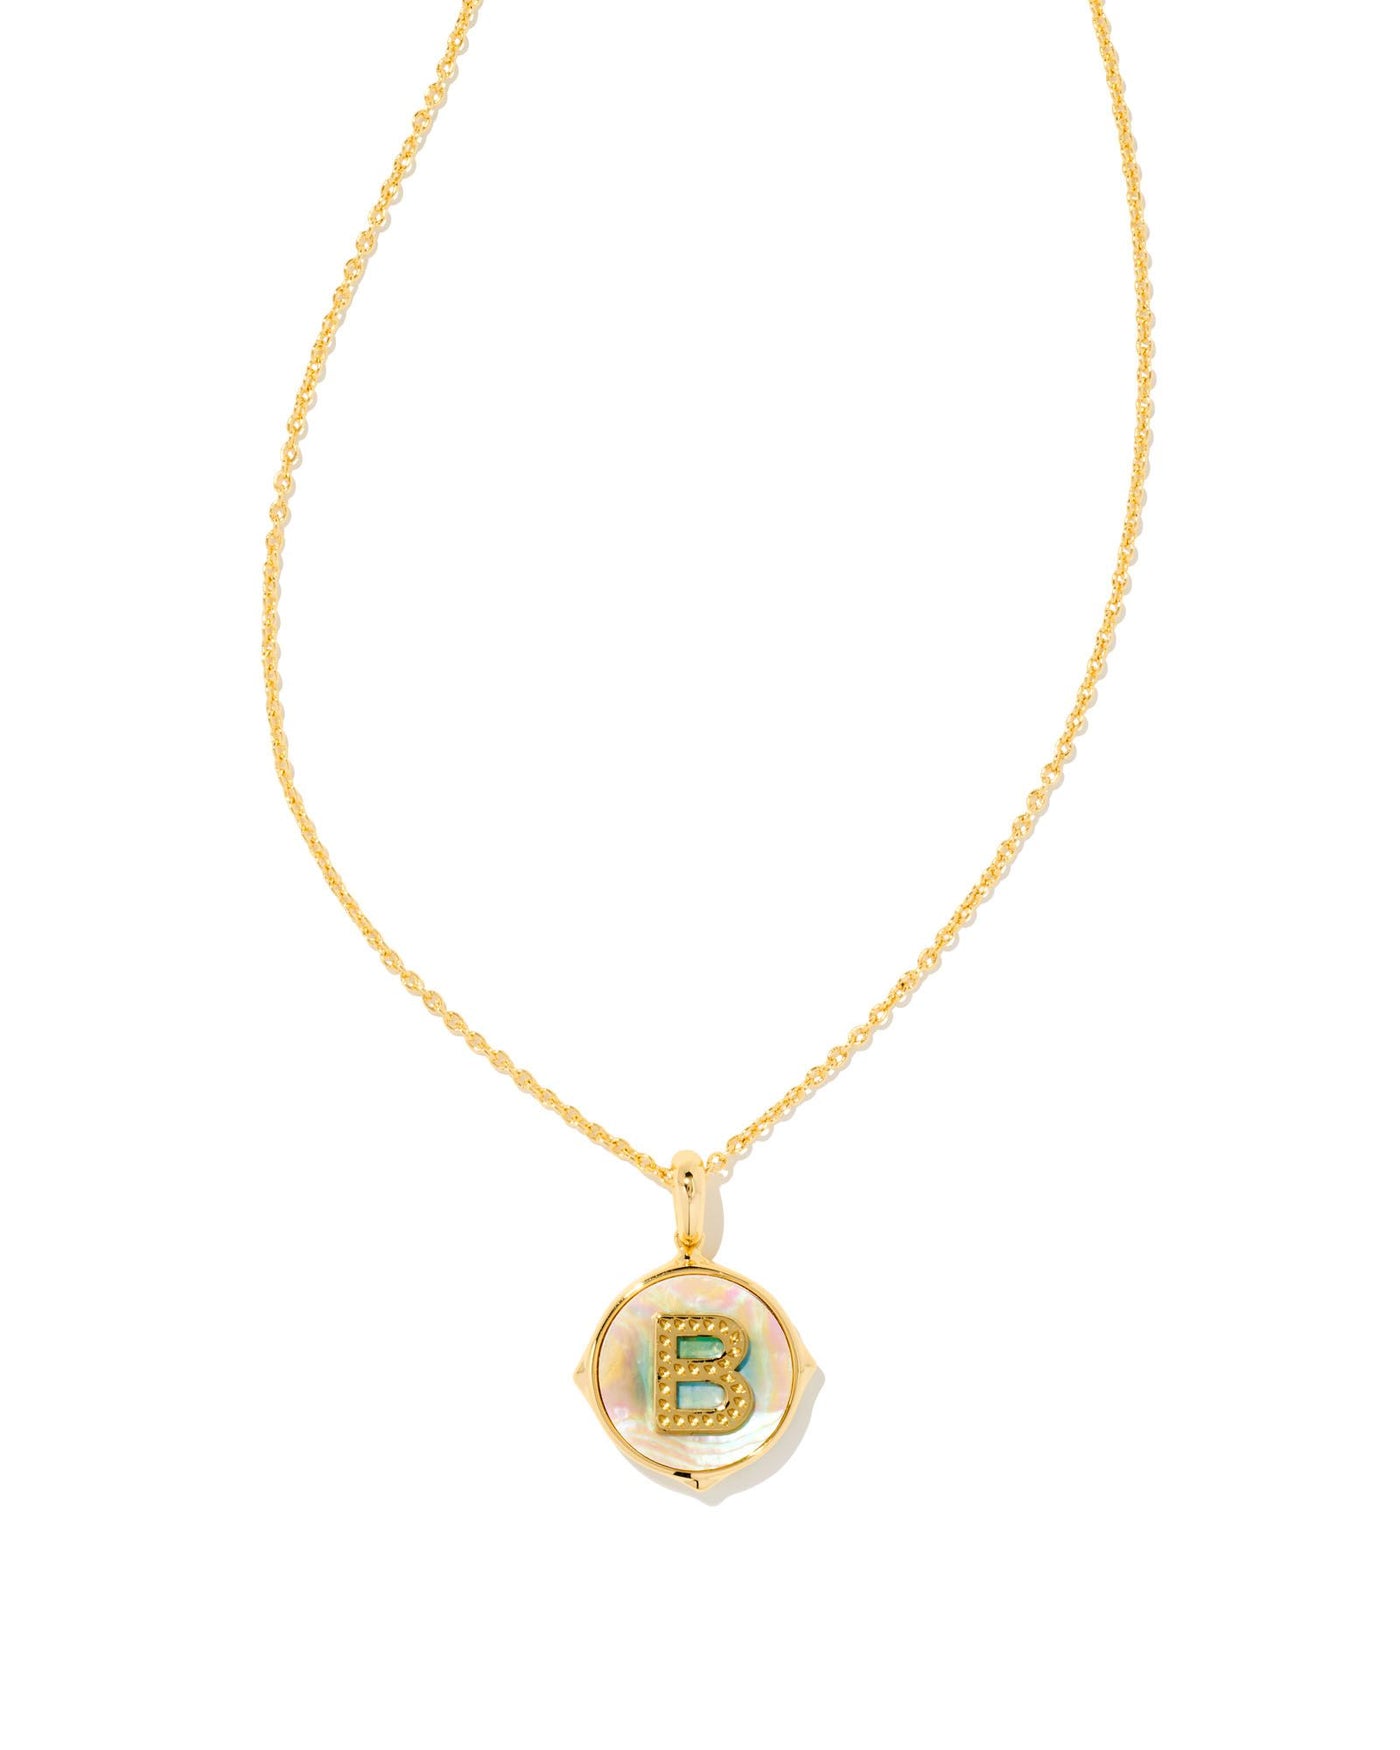 Letter B Disc Pendant Necklace Gold on white background, front view.